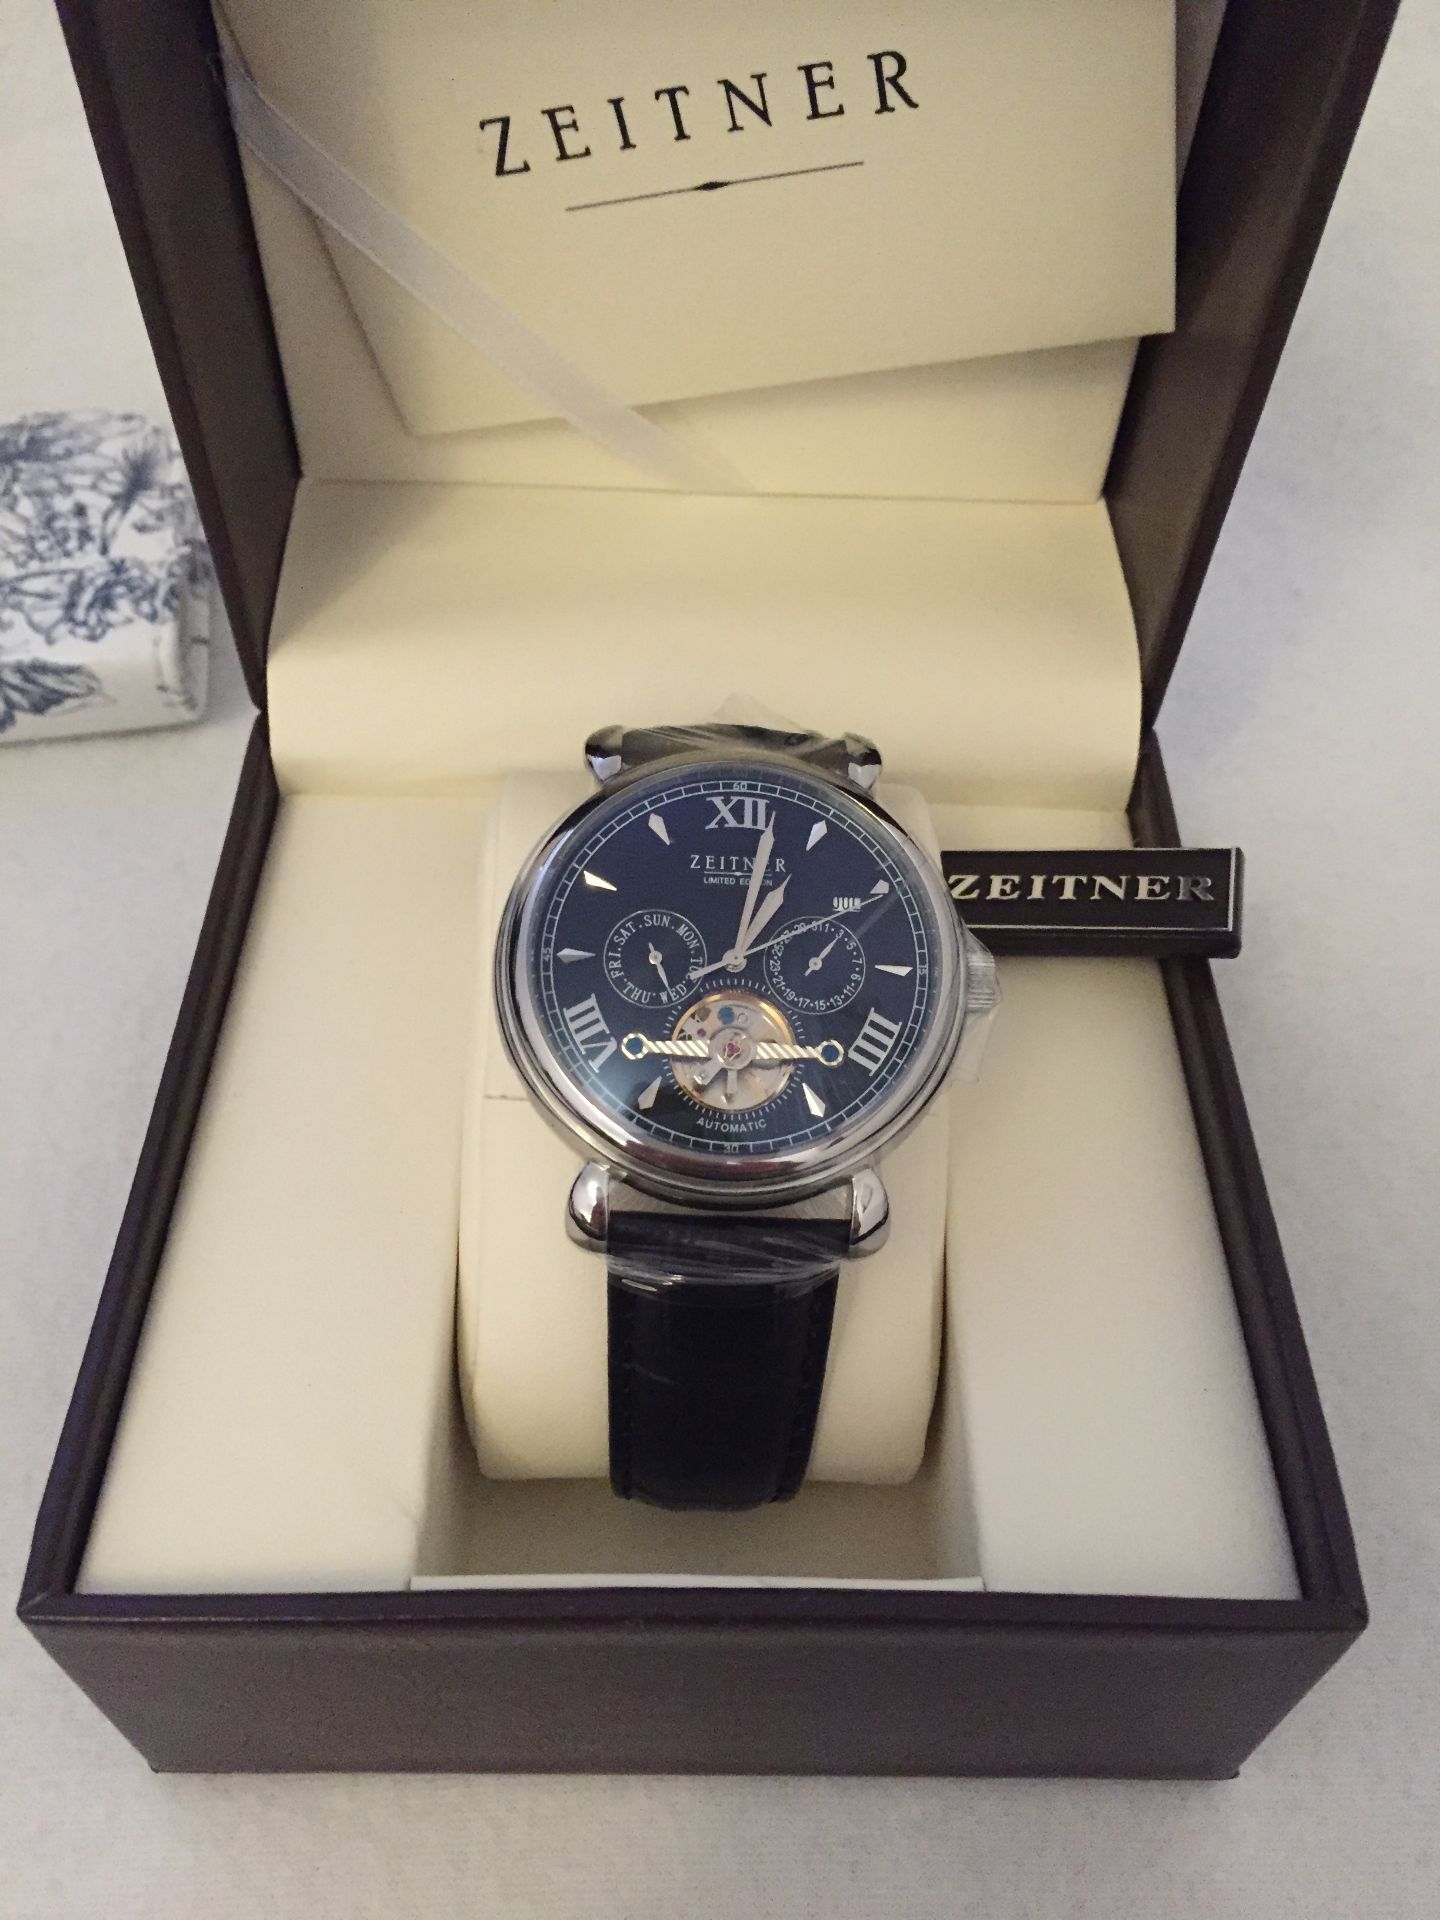 Zietner Limited Edition Black. BRAND NEW !!! RRP £645. - Image 5 of 10